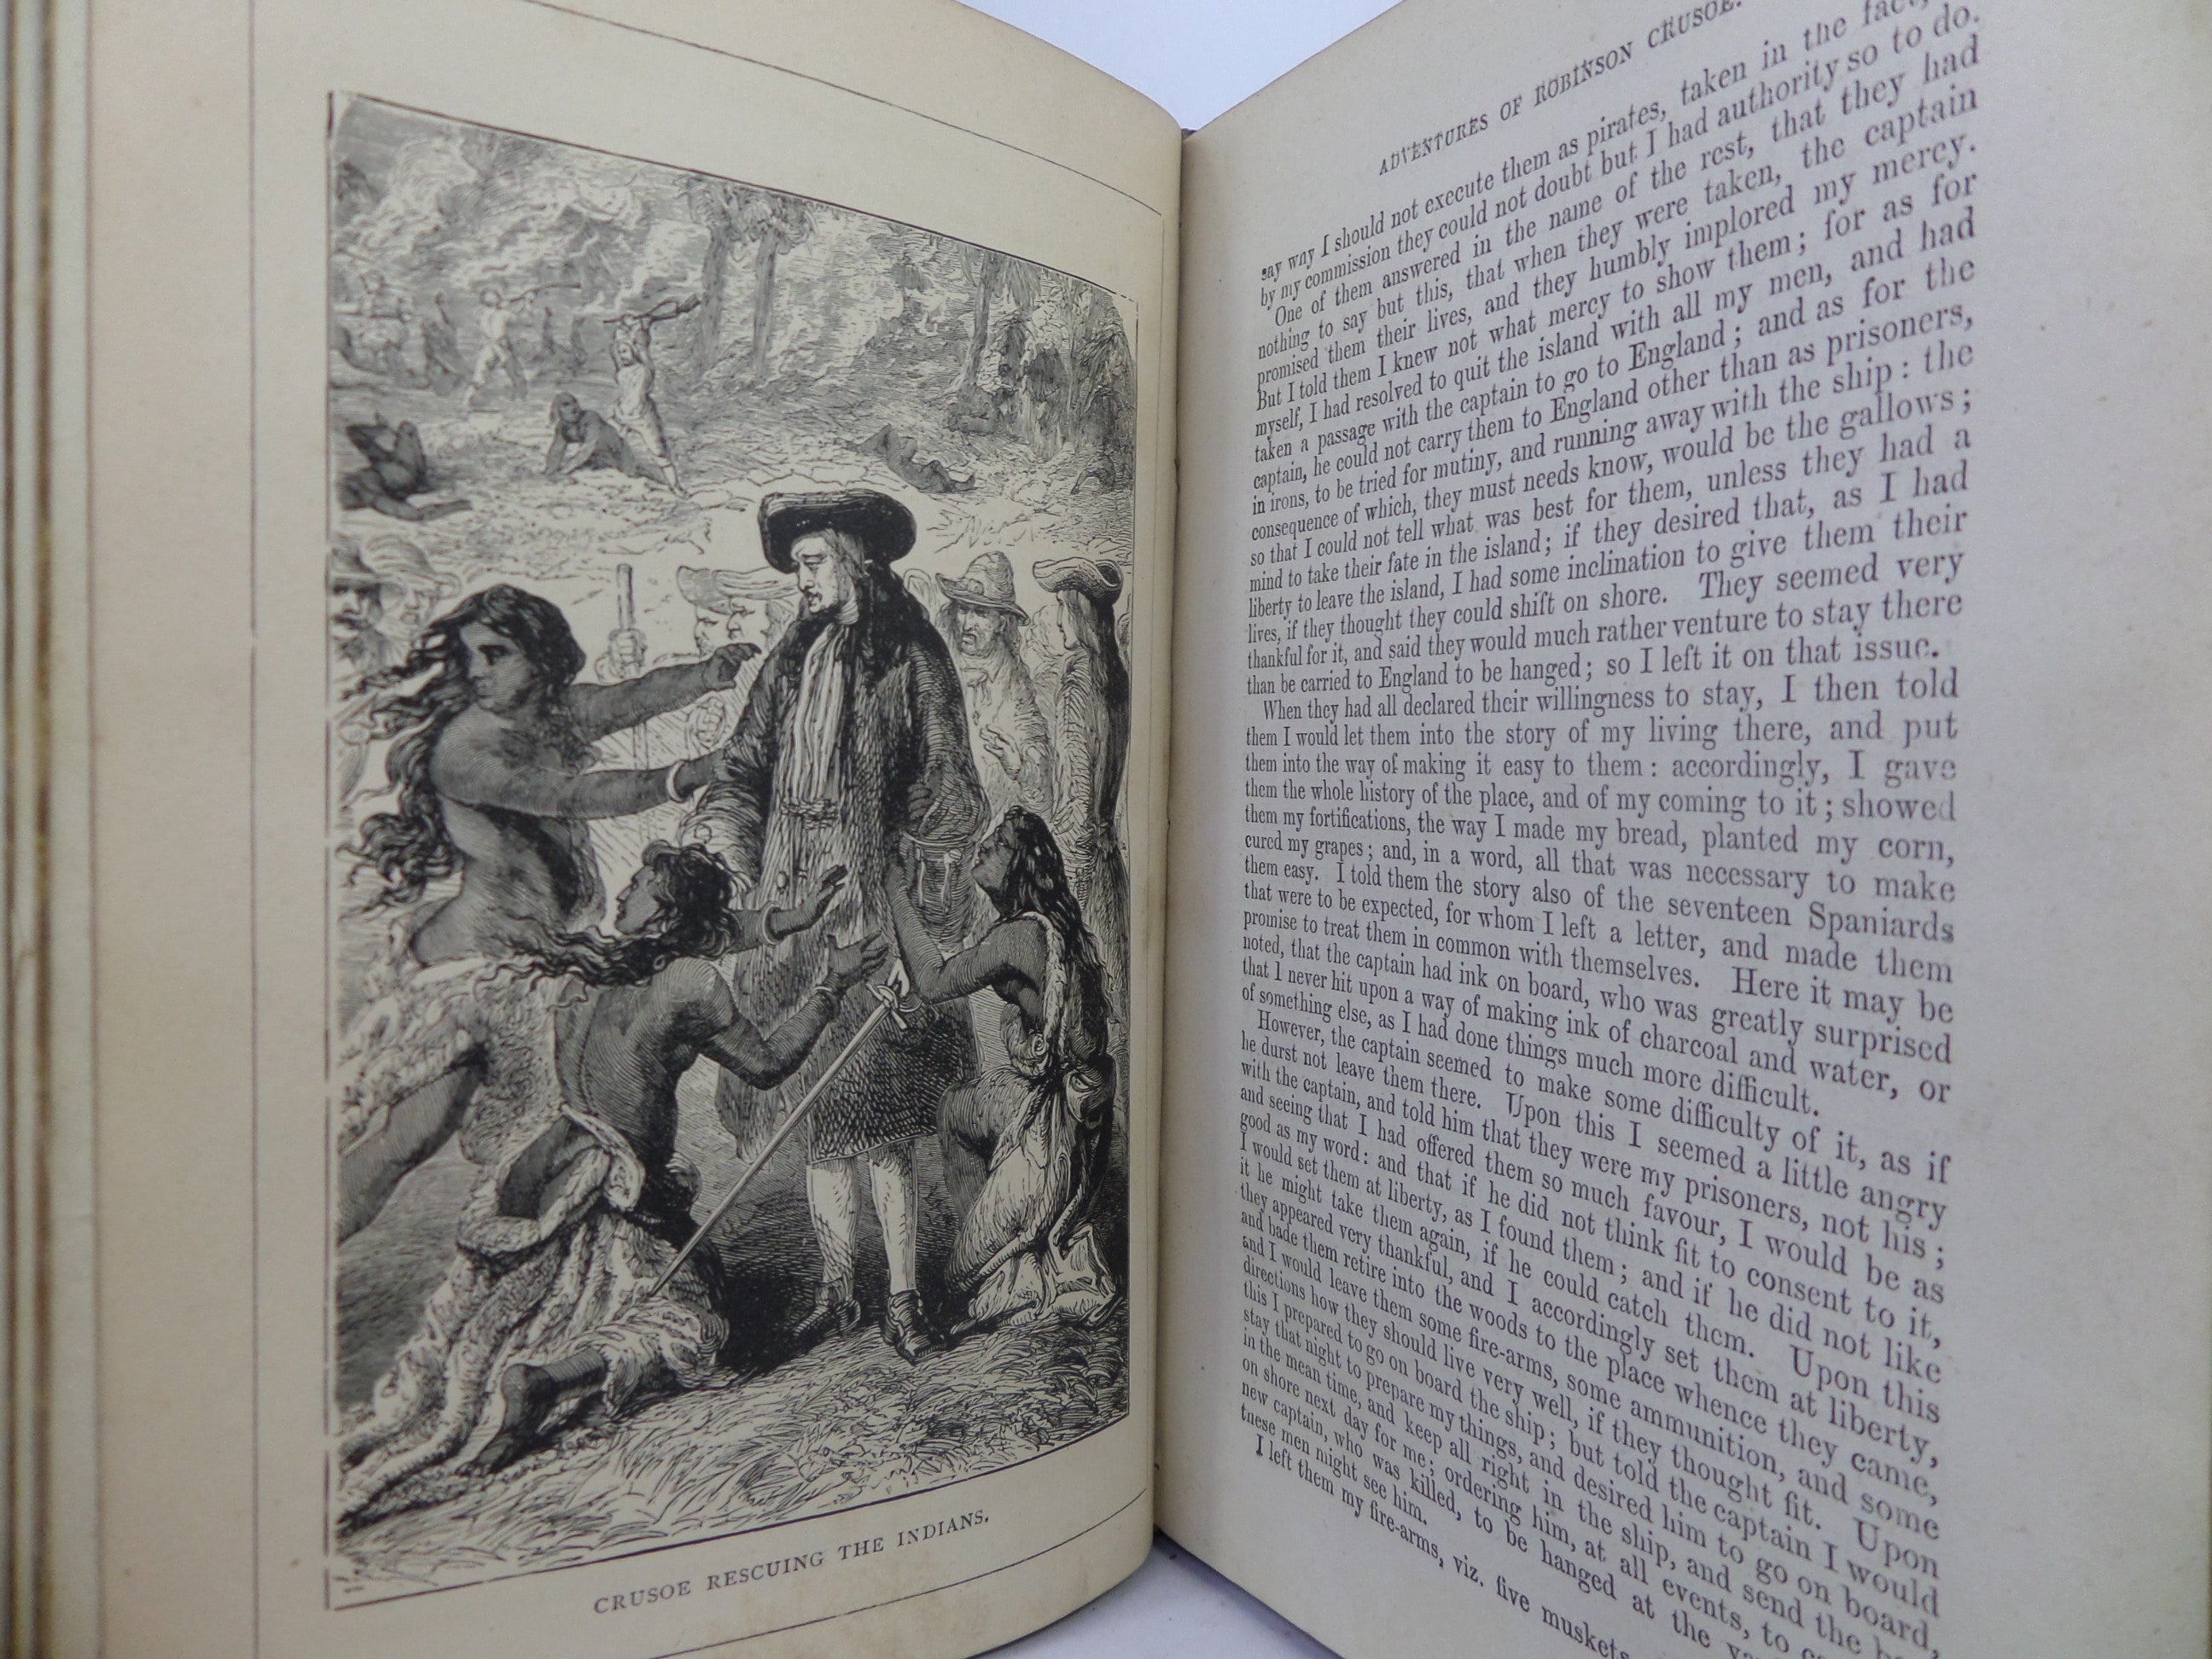 THE LIFE AND ADVENTURES OF ROBINSON CRUSOE BY DANIEL DEFOE, LEATHER BOUND